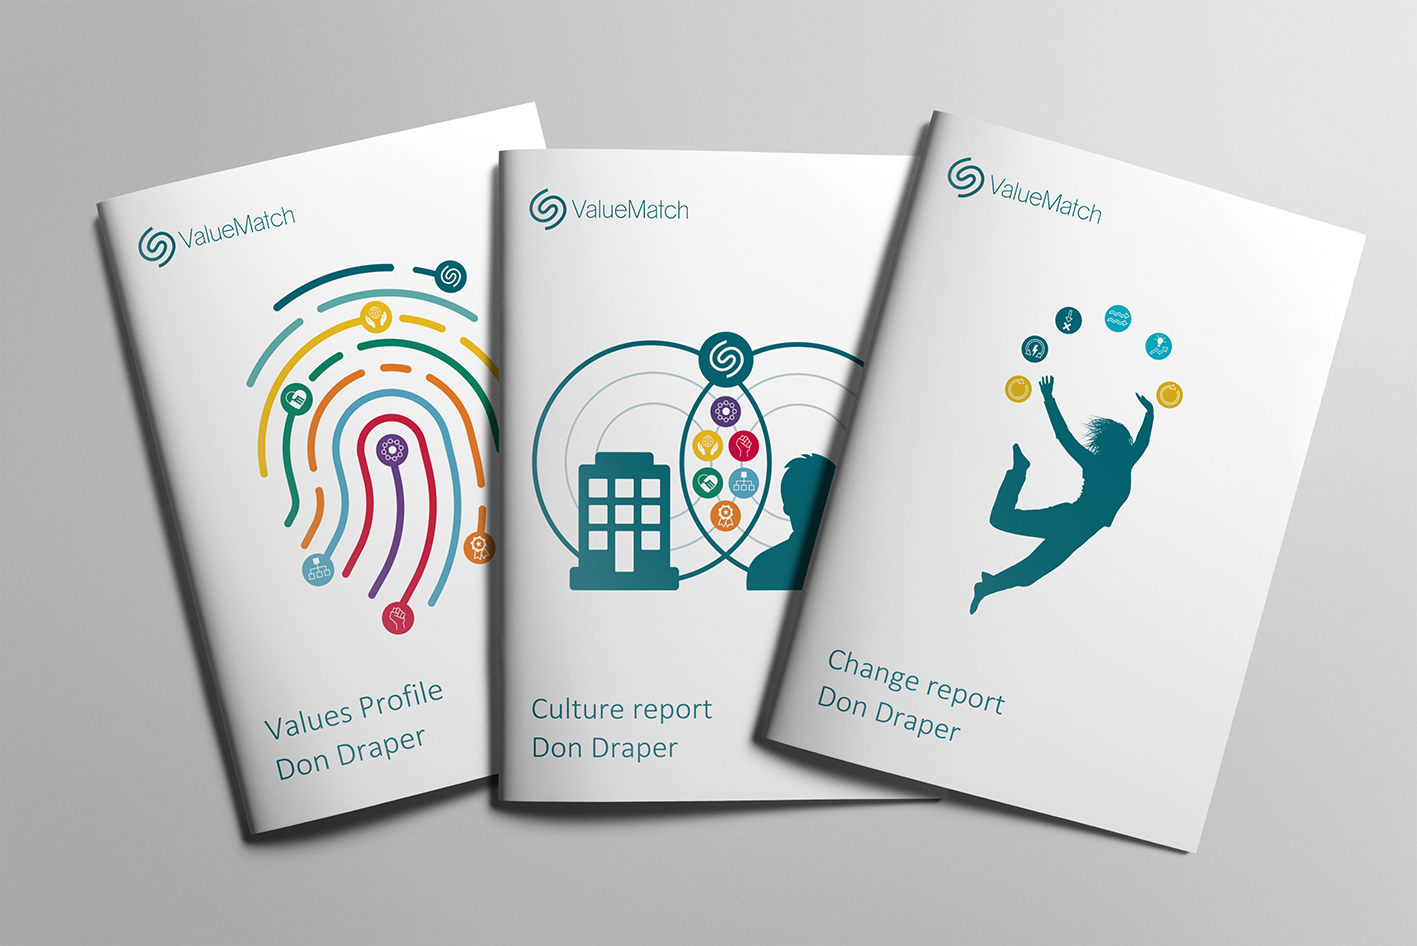 ValueMatch values, culture and change reports